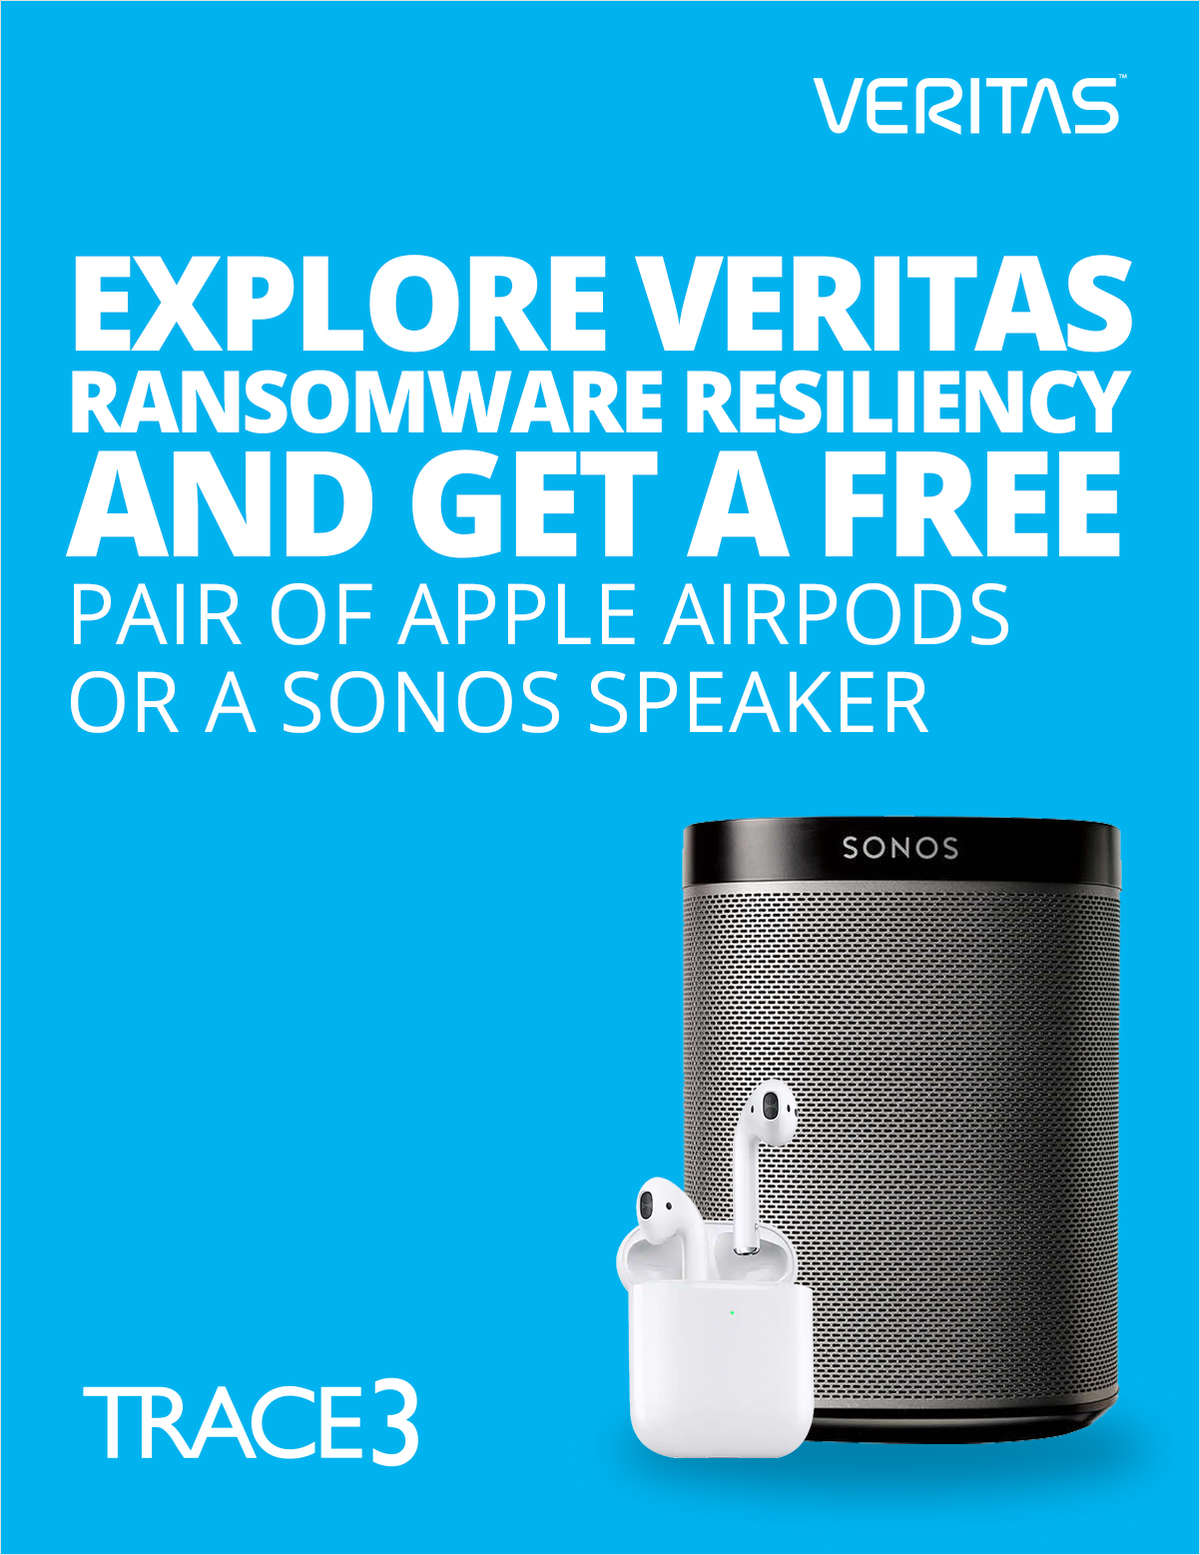 Explore Veritas Ransomware Resiliency and Get a Free Pair of Apple AirPods or a Sonos Speaker